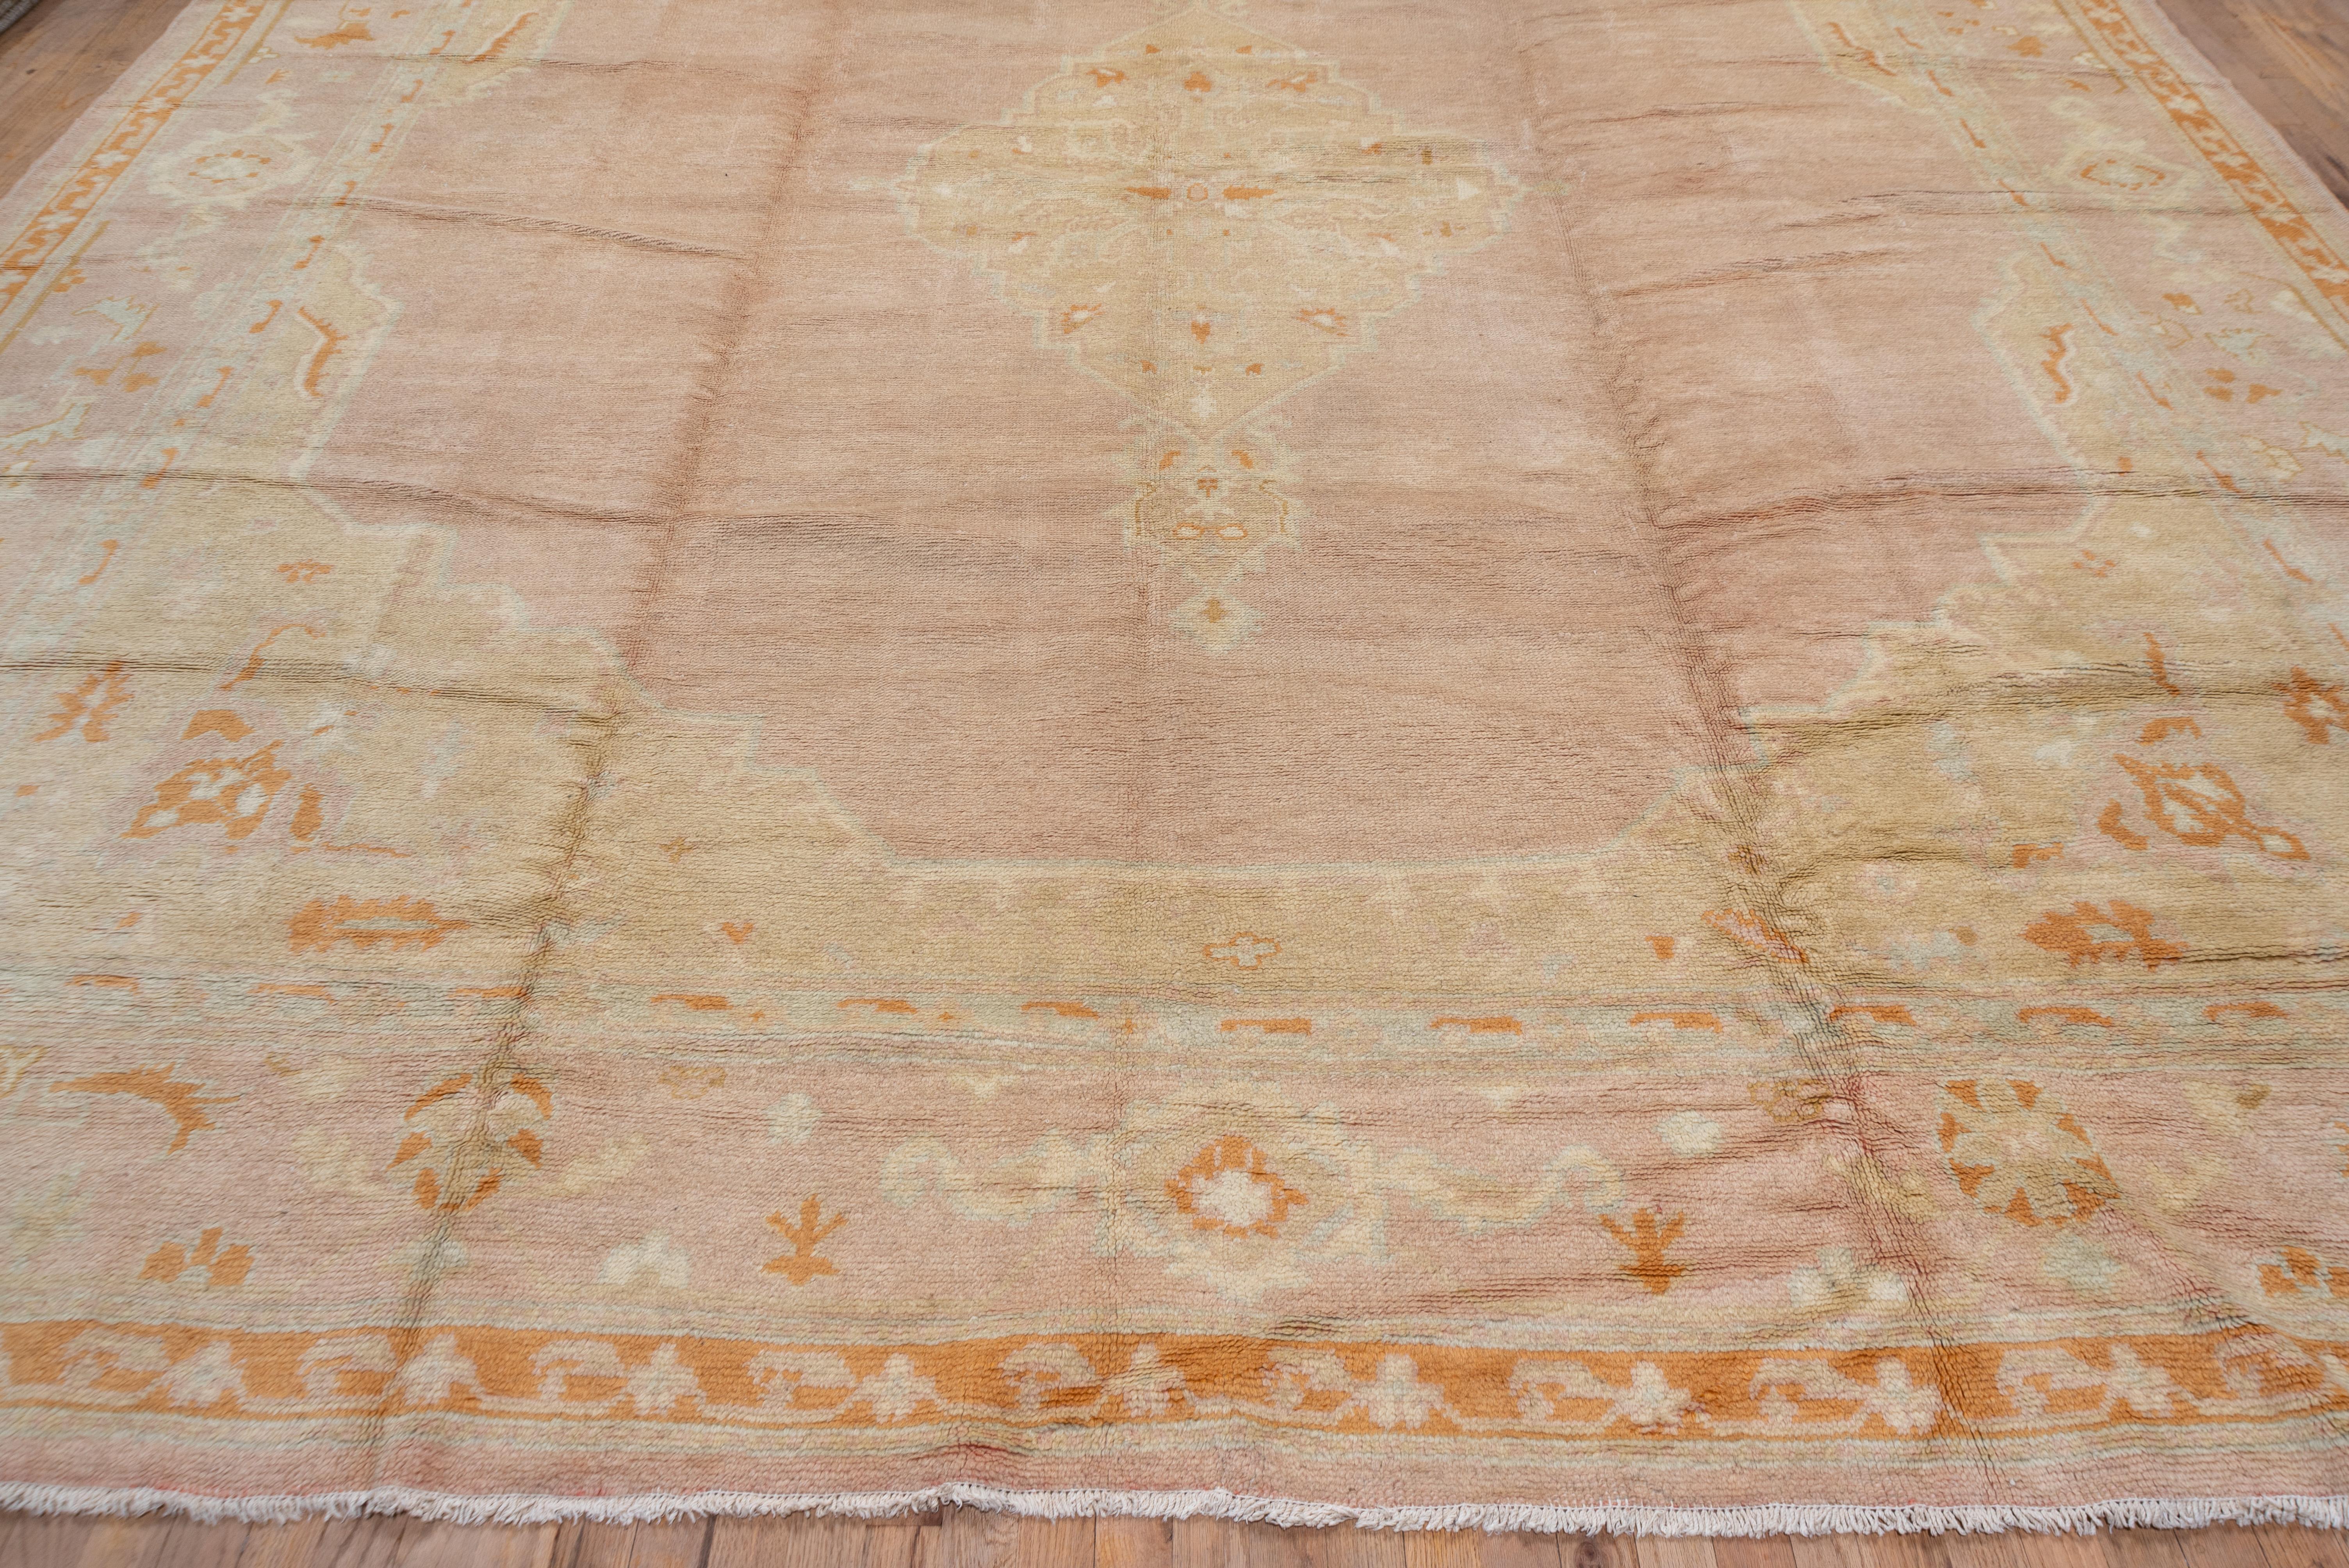 Hand-Knotted Antique Pink Turkish Oushak Carpet with Orange & Yellow Accents, circa 1920s For Sale